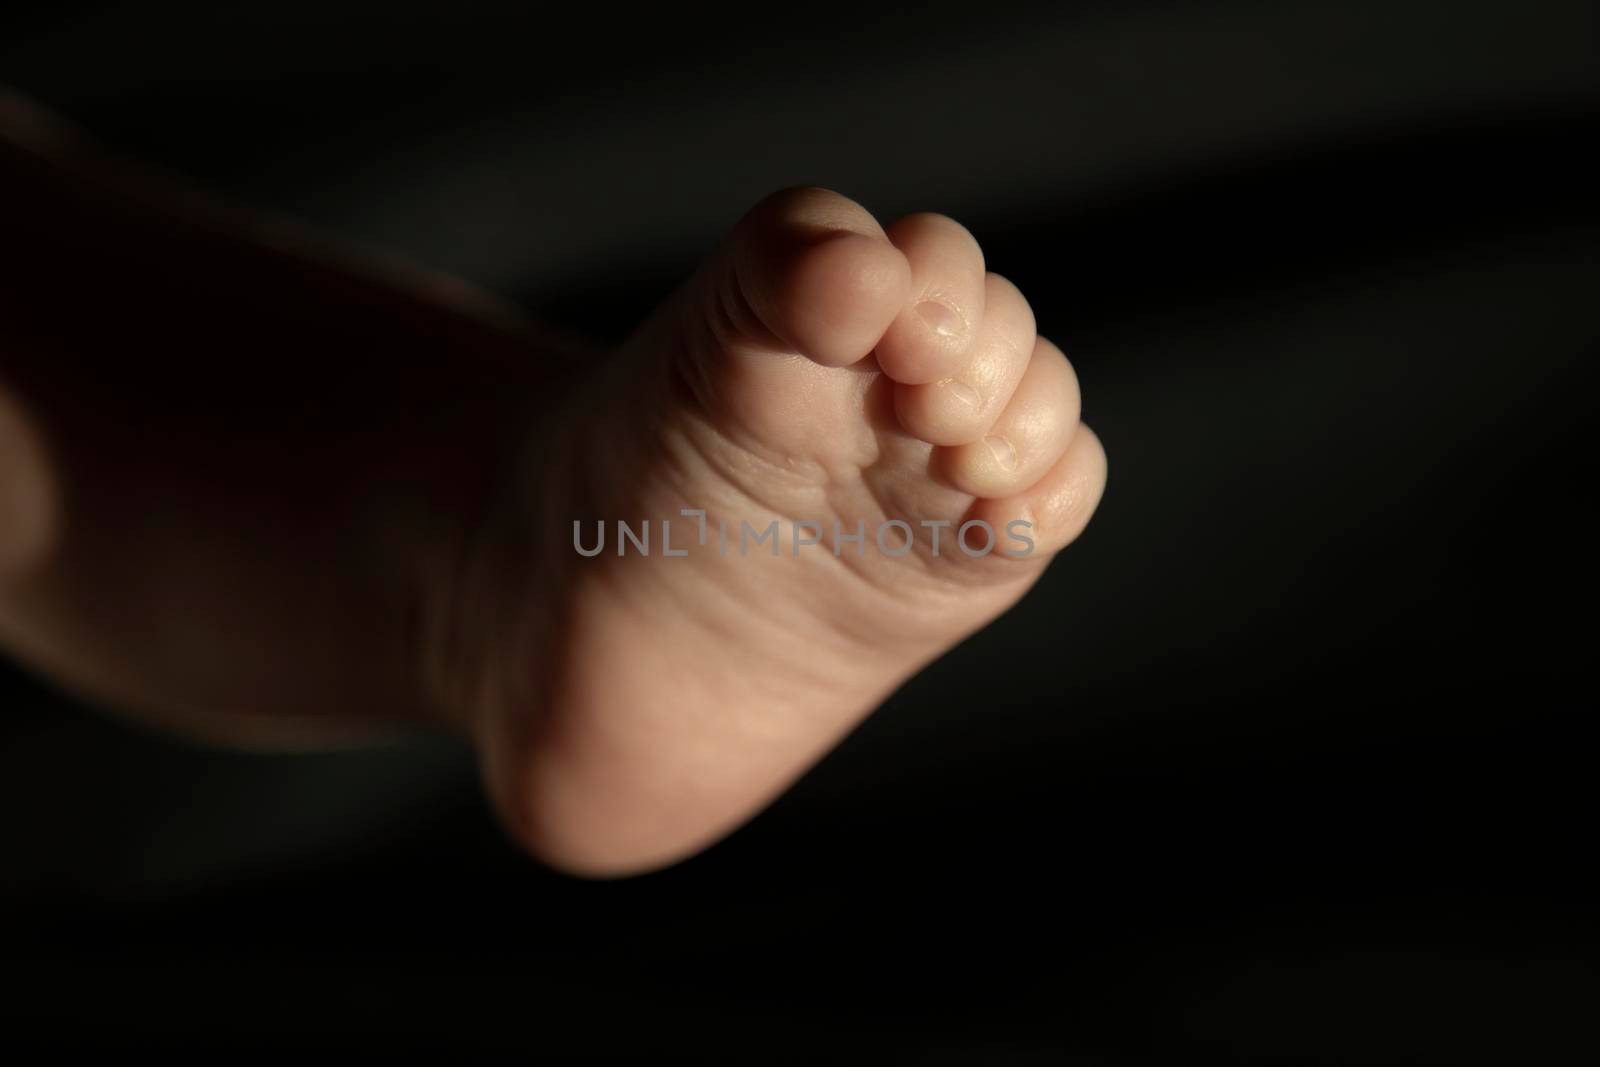 Tender image of a baby foot by ValentimePix